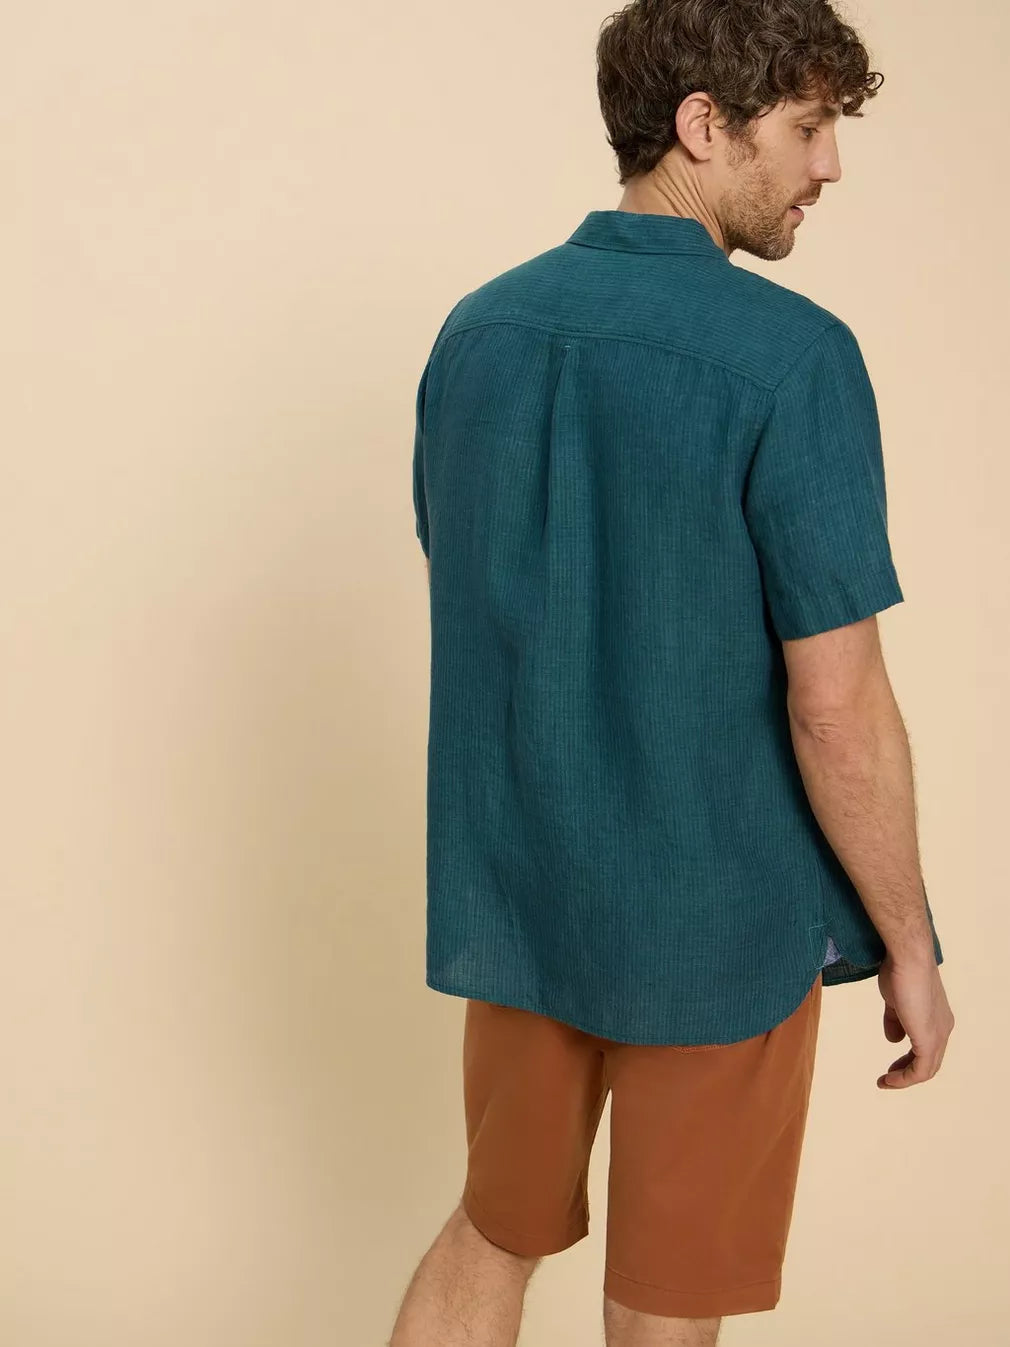 White Stuff Pembroke Short Sleeve Linen Shirt in Teal Multi-Mens-Ohh! By Gum - Shop Sustainable